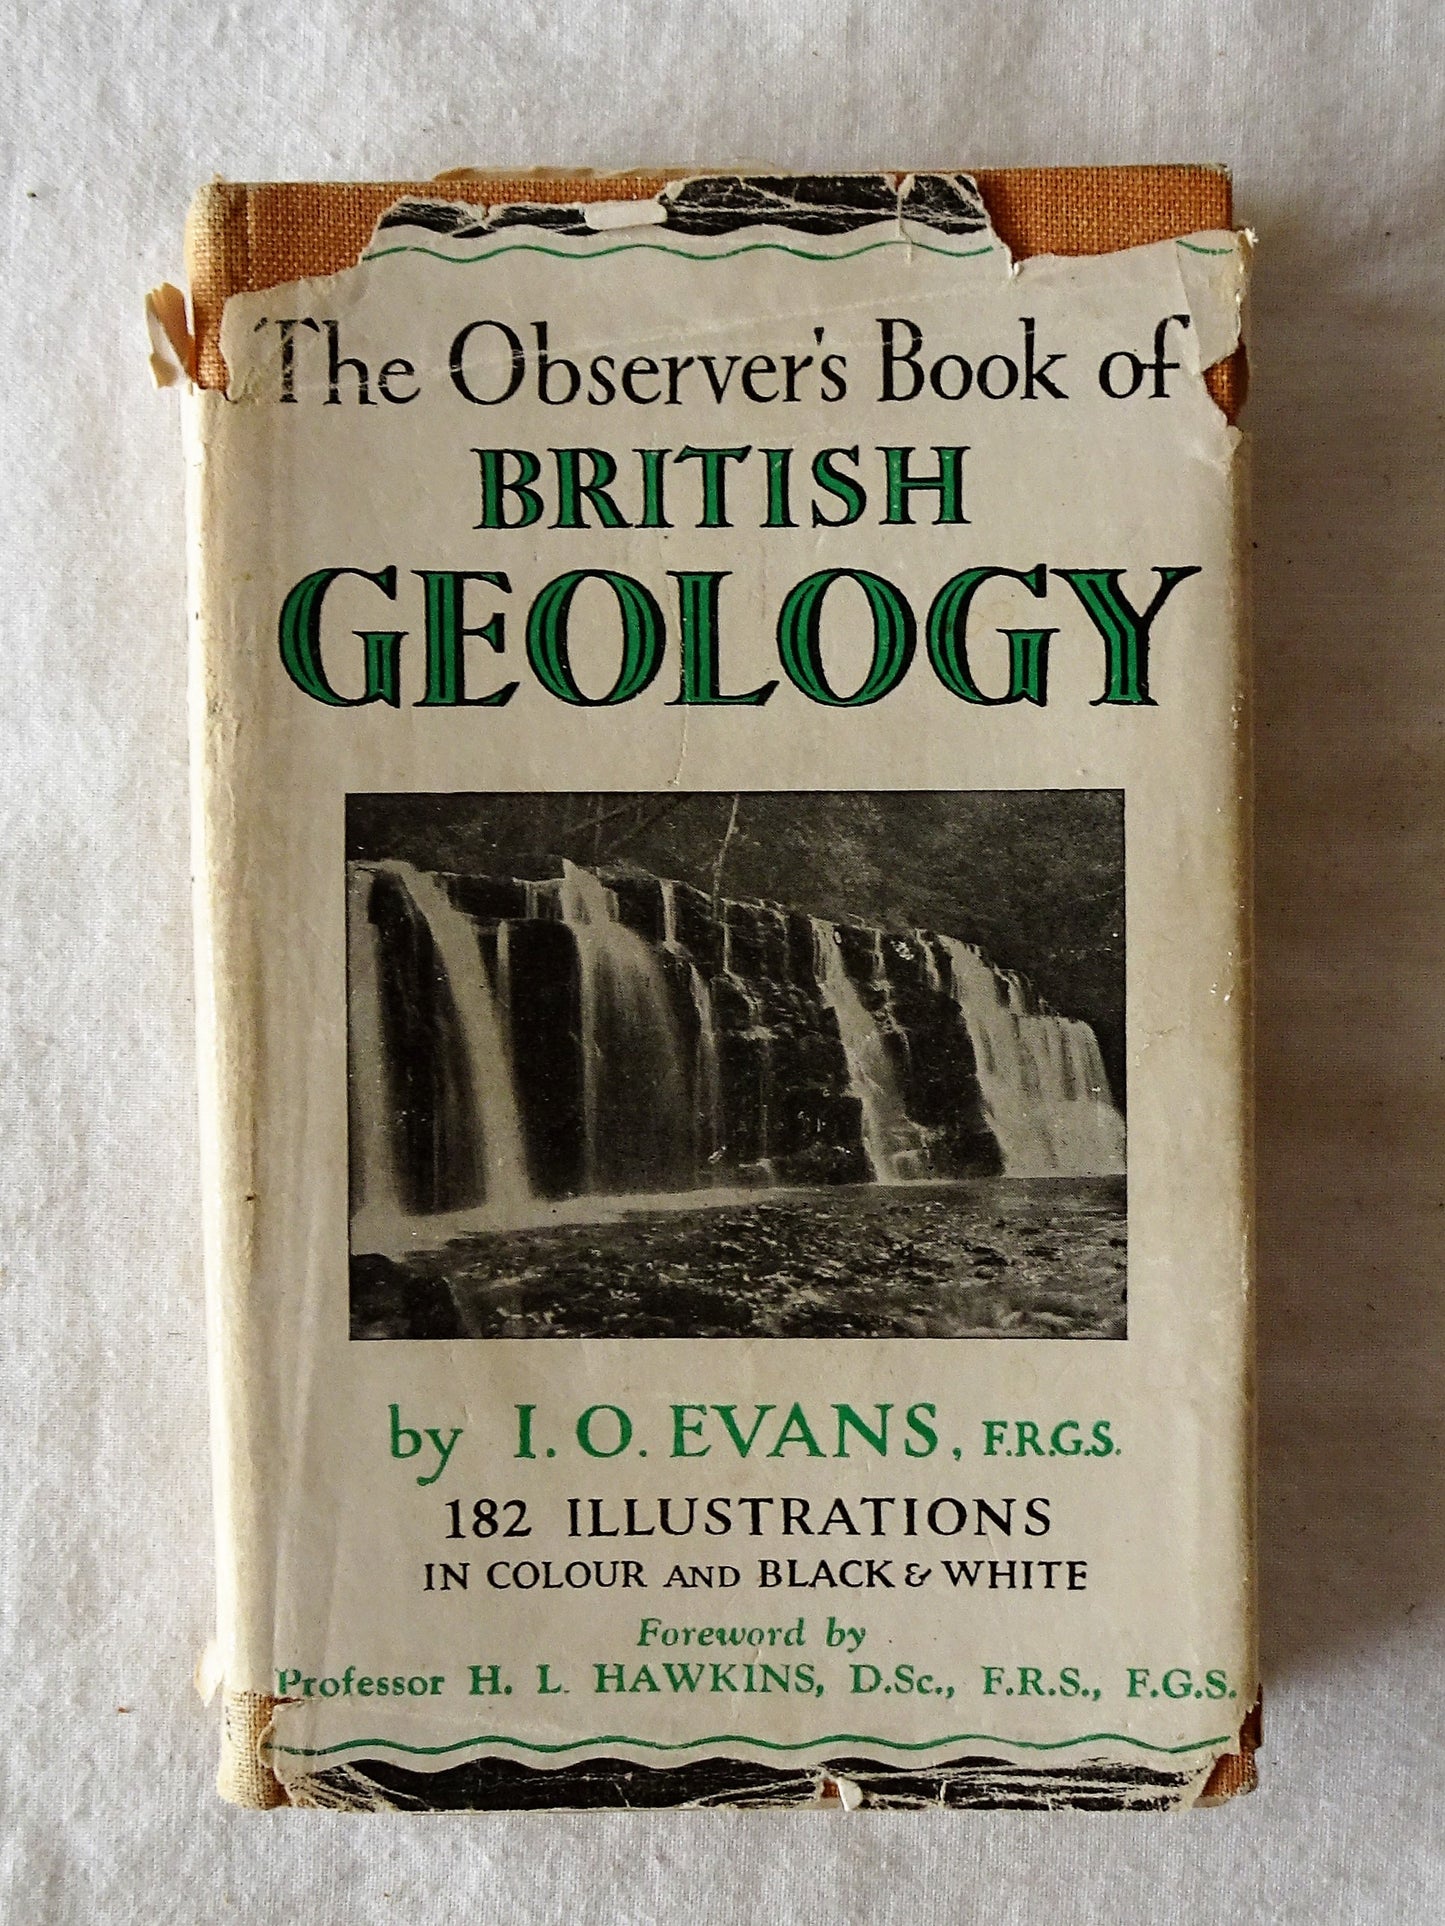 The Observer's Book of British Geology by I. O. Evans